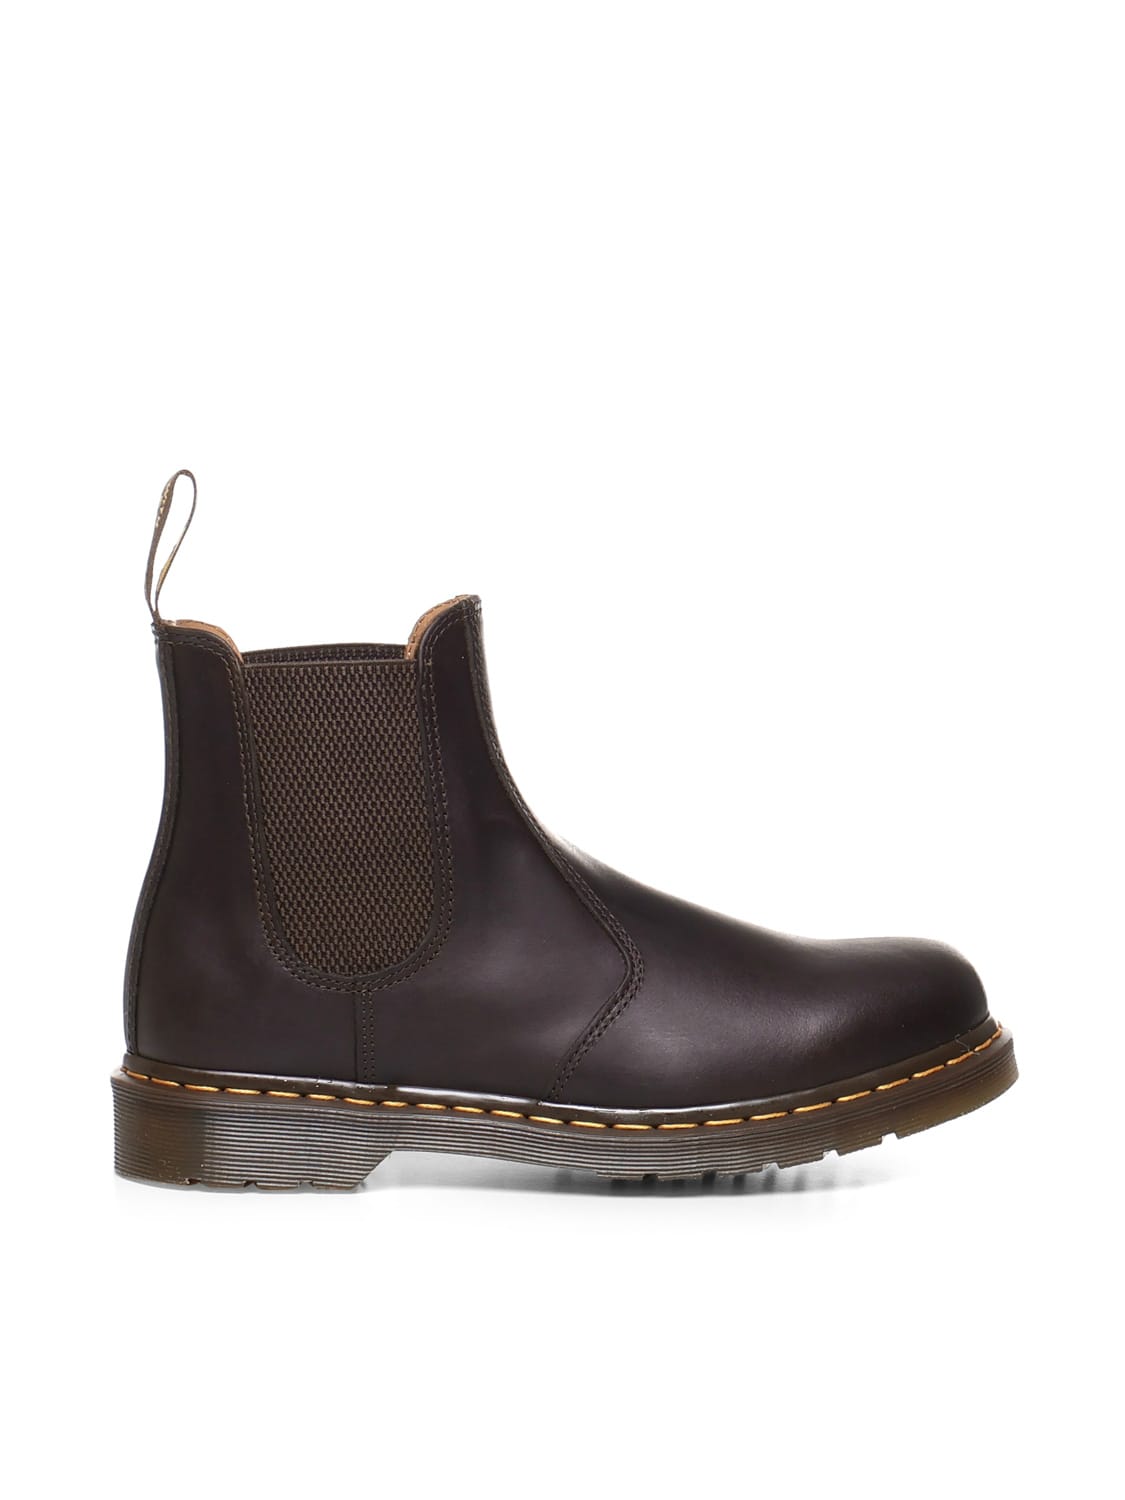 DR. MARTENS' 2976 CRAZY HORSE LEATHER CHELSEA BOOTS